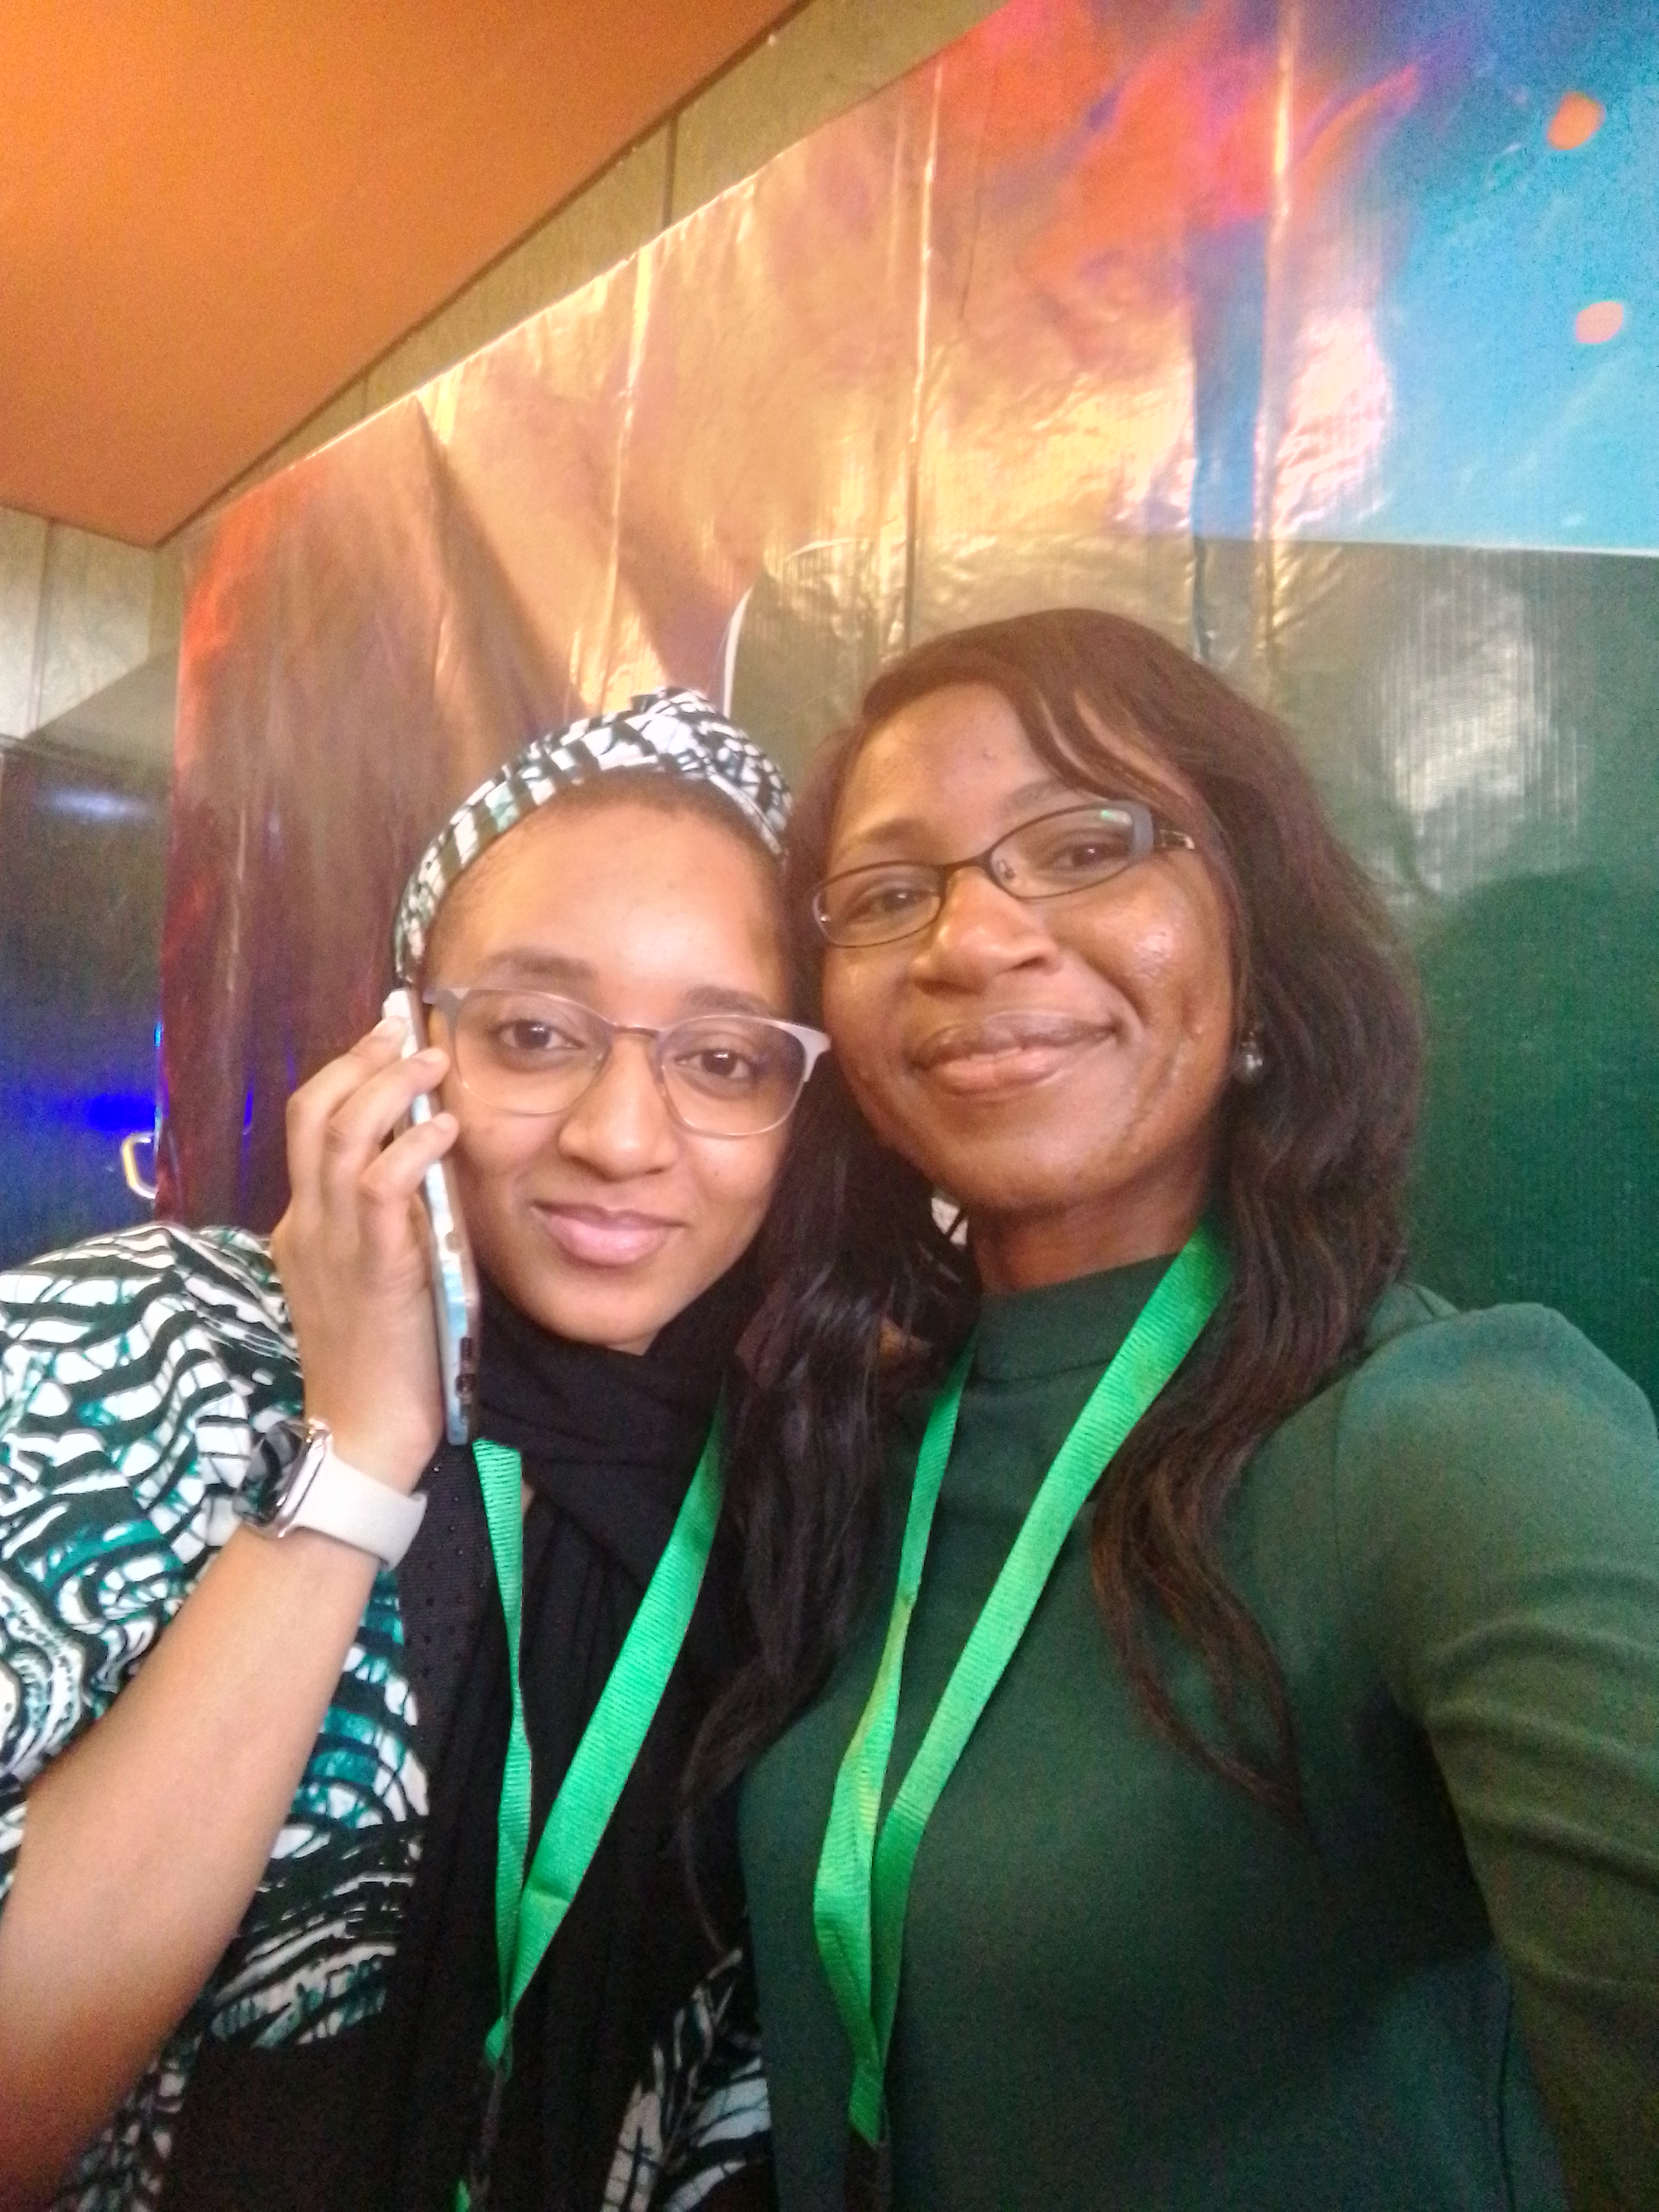 With Naeema from NitDA, the organizers of the event #TechInnovation